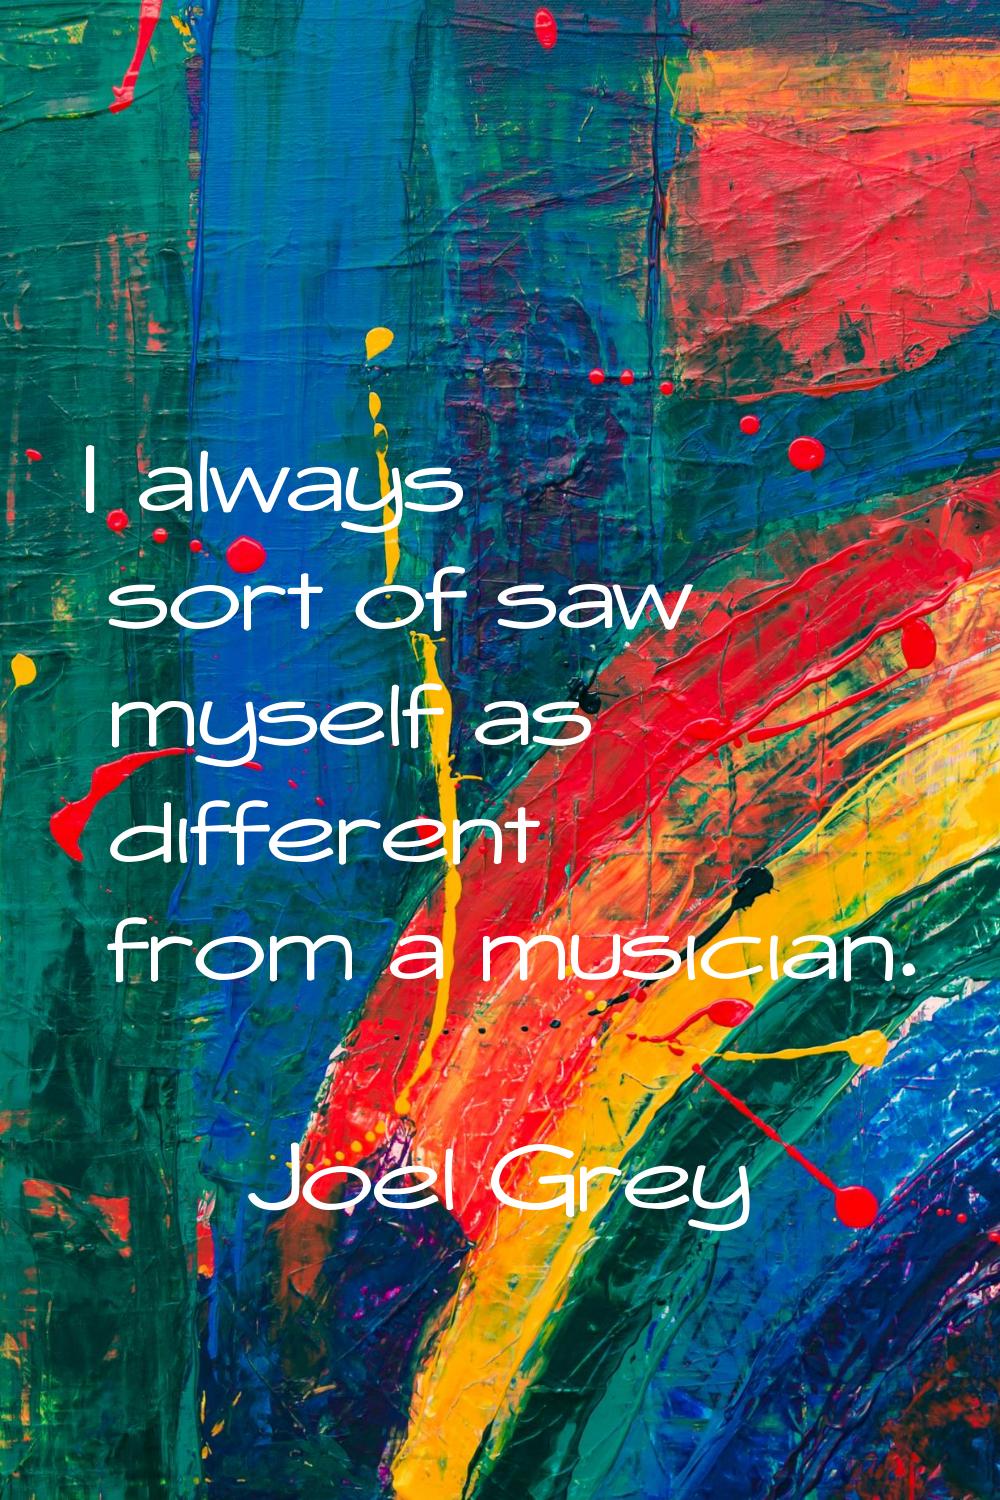 I always sort of saw myself as different from a musician.